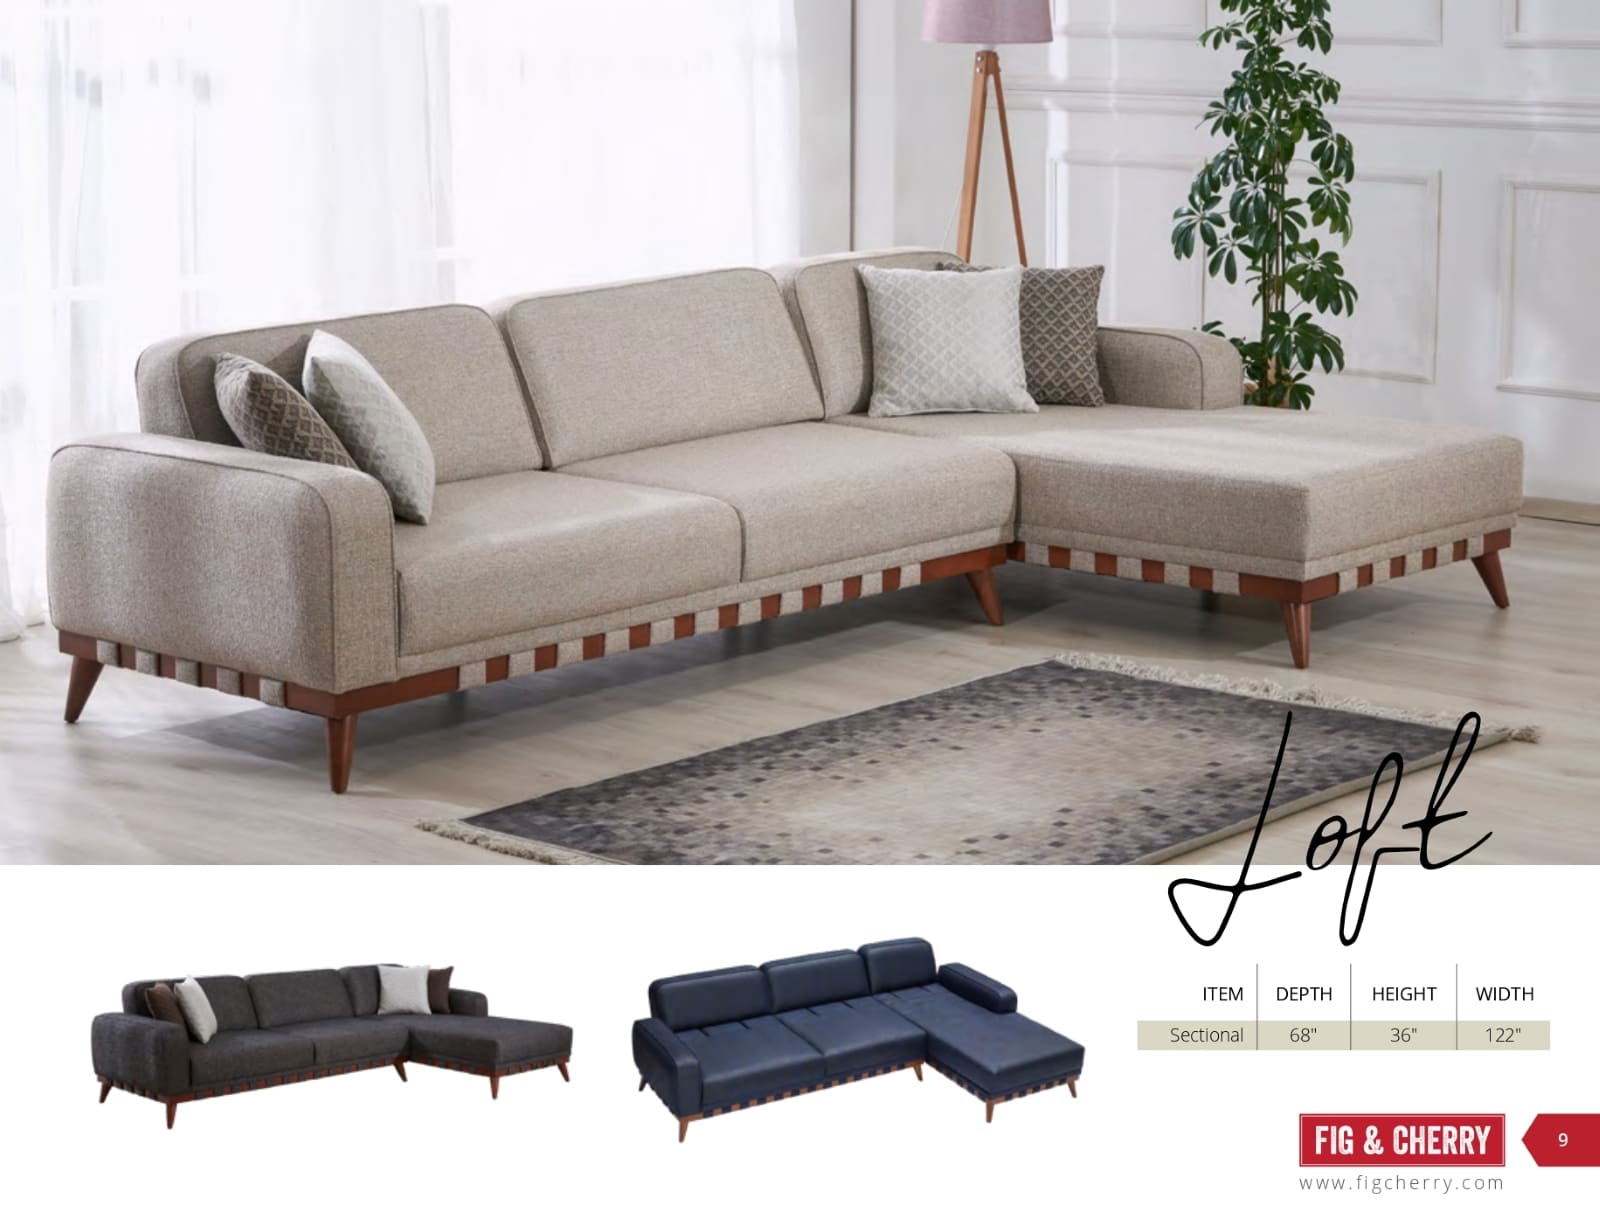 Fig & Cherry Indoor Collection (Sofas and Sectionals) Catalog (9)